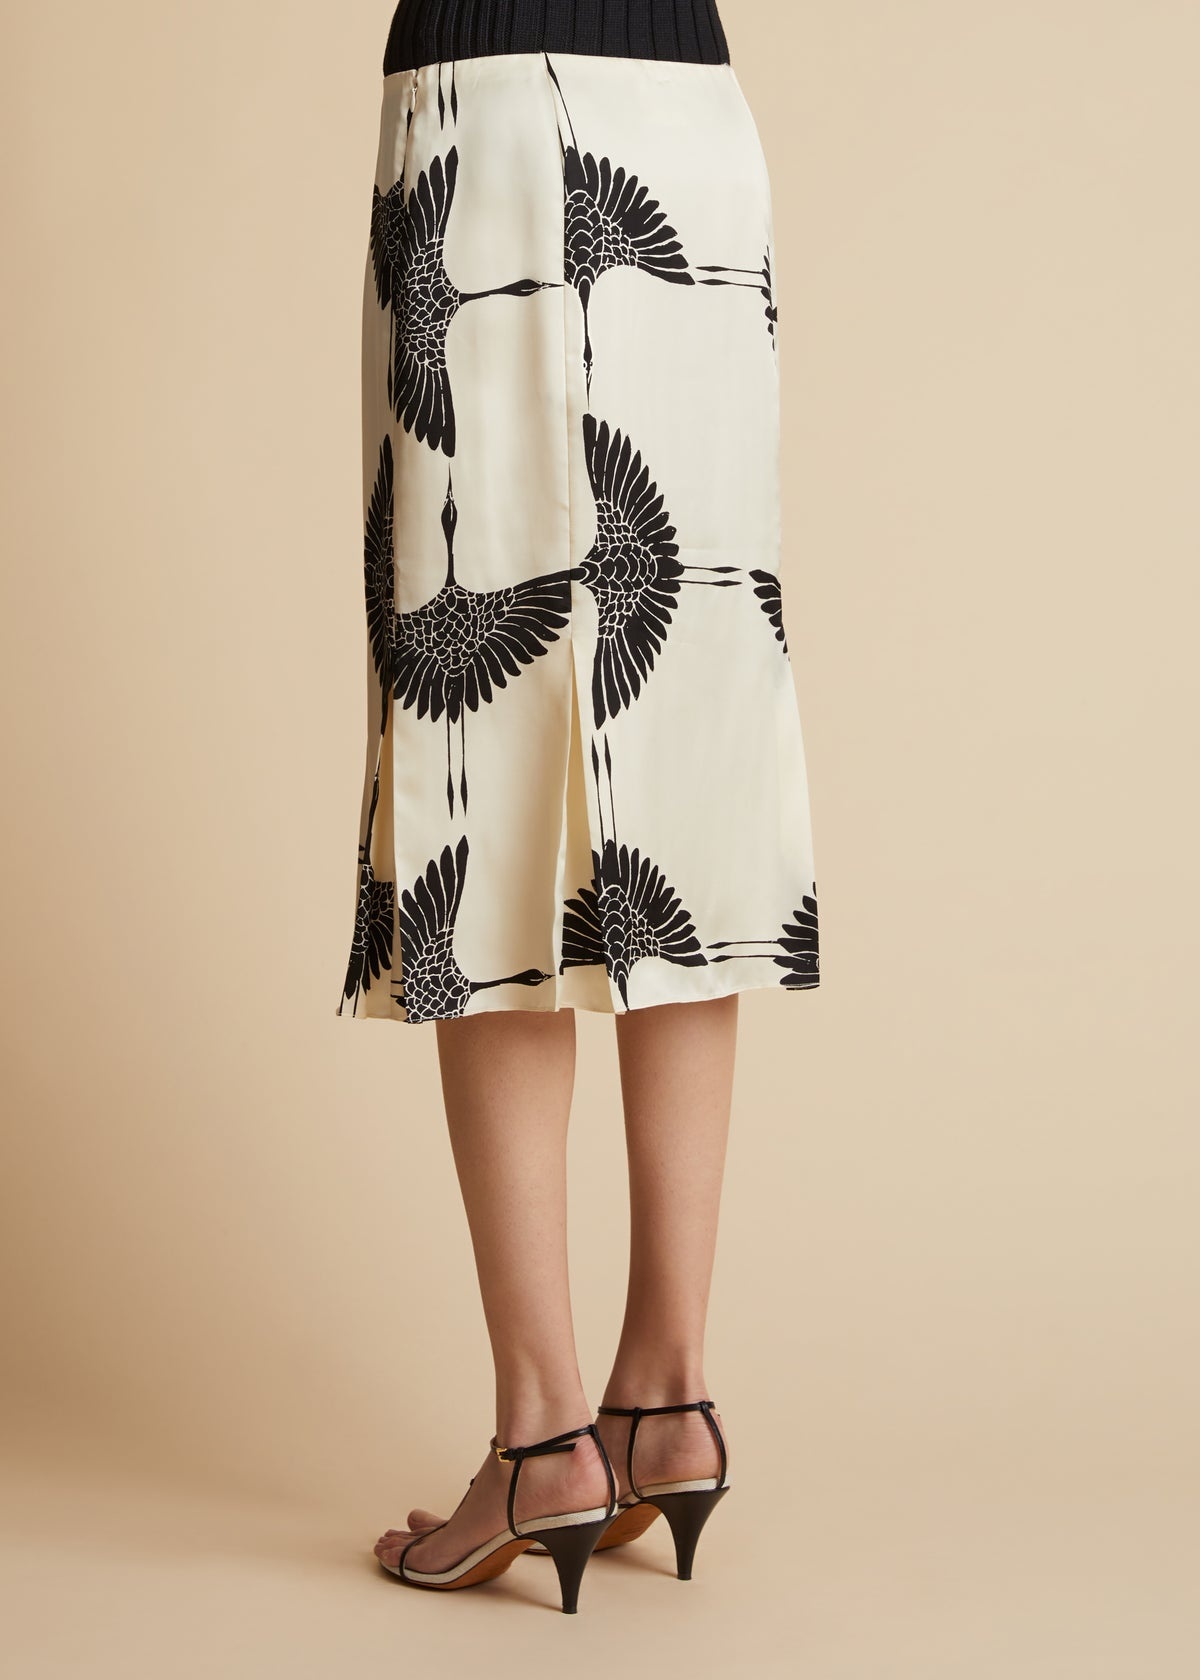 The Levy Skirt in Cream and Black Crane Print - 4